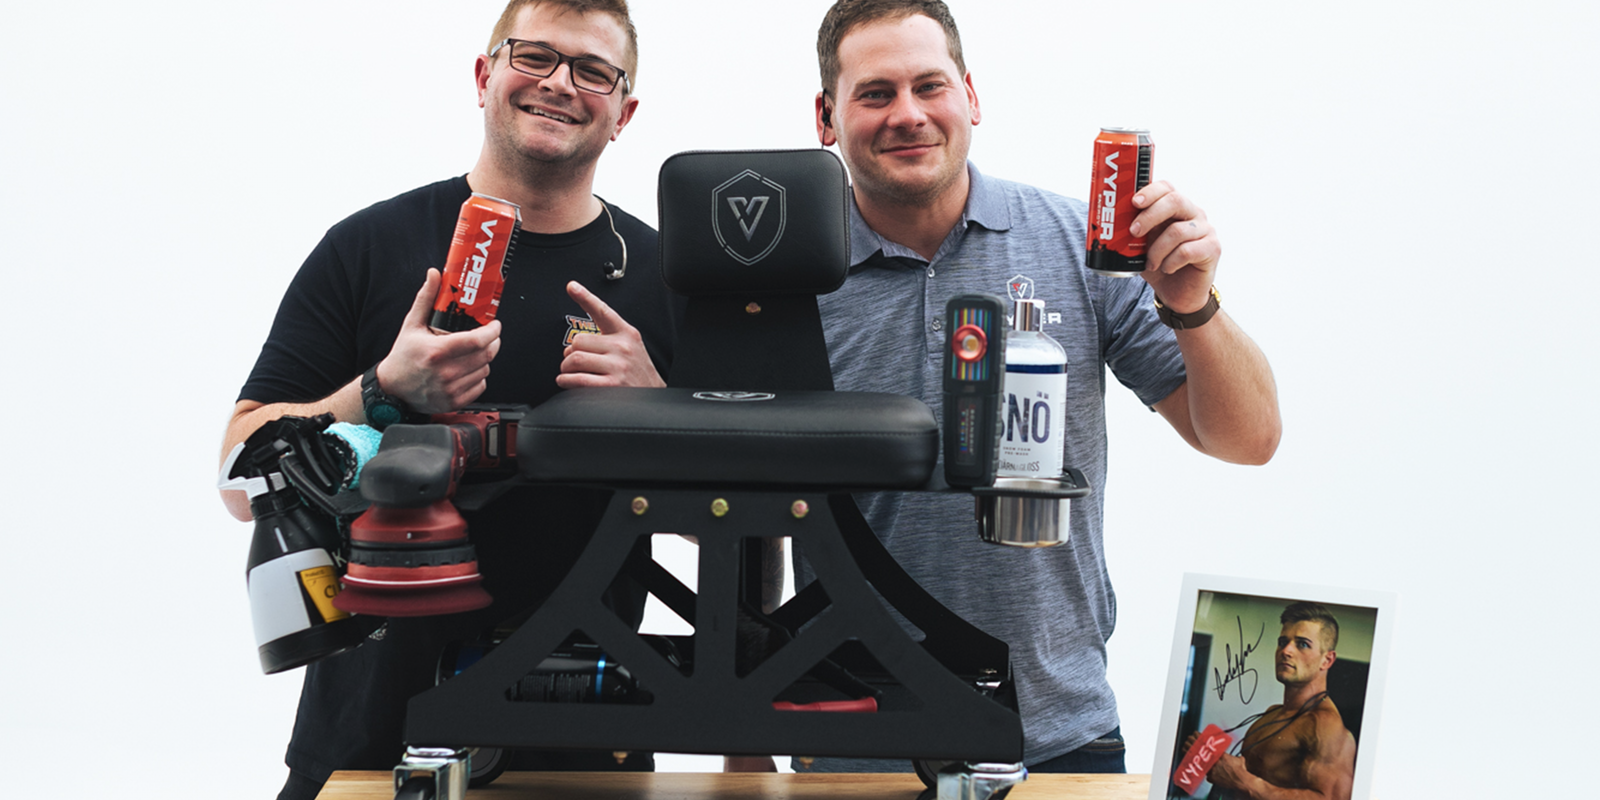 Two guys behind an industrial shop chair on wheels sitting on a table. Both are holding red energy drink cans and smiling